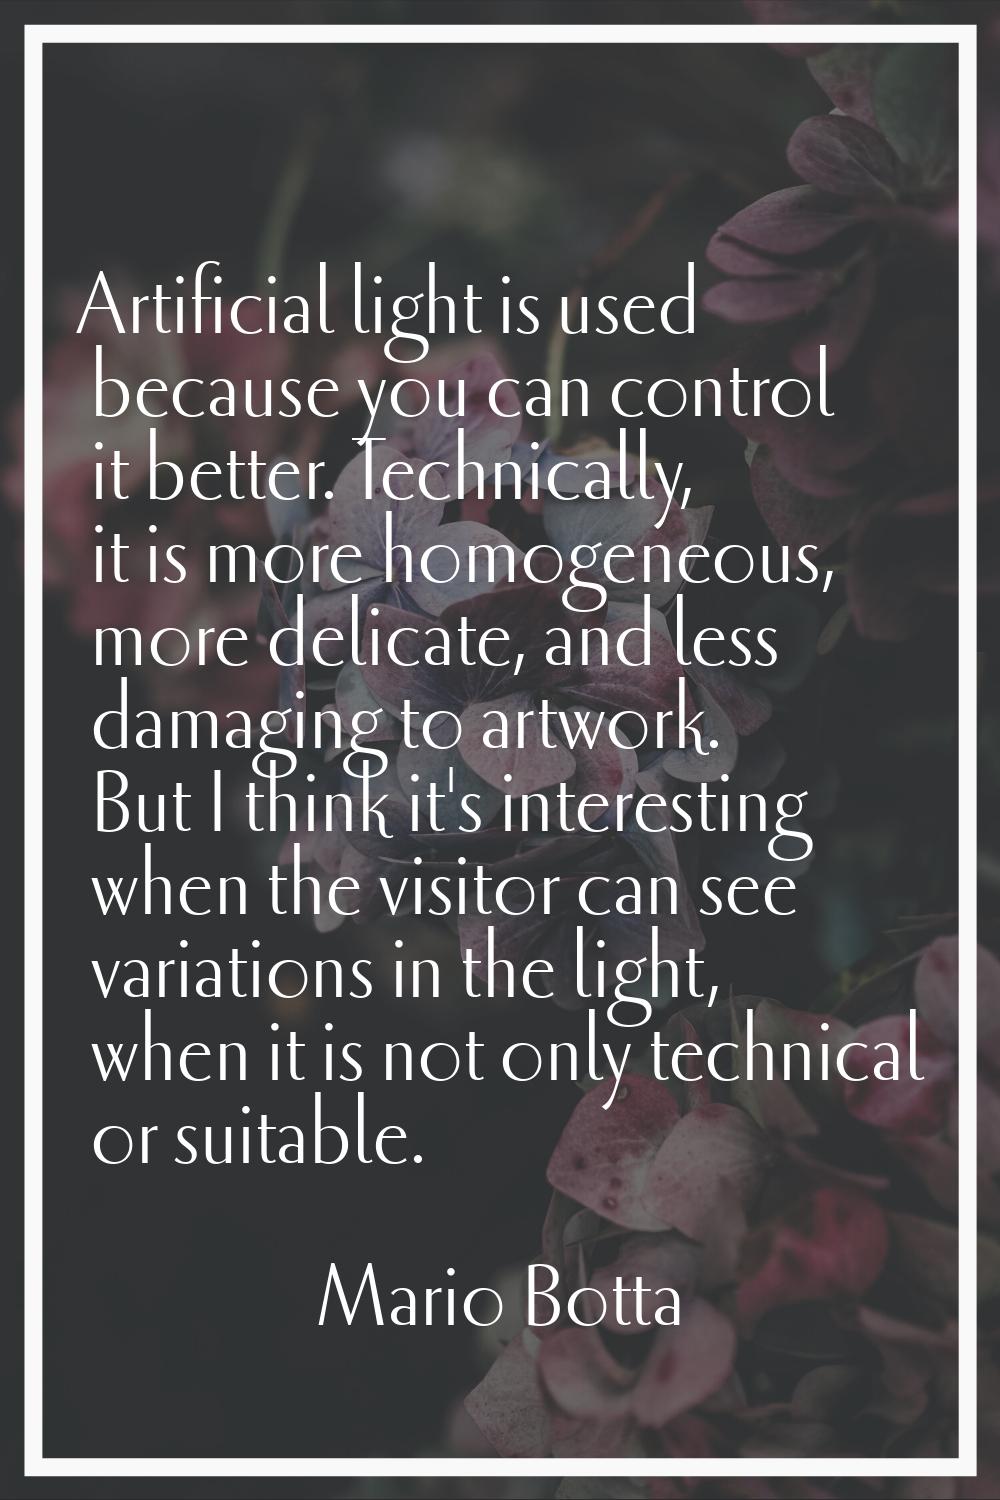 Artificial light is used because you can control it better. Technically, it is more homogeneous, mo